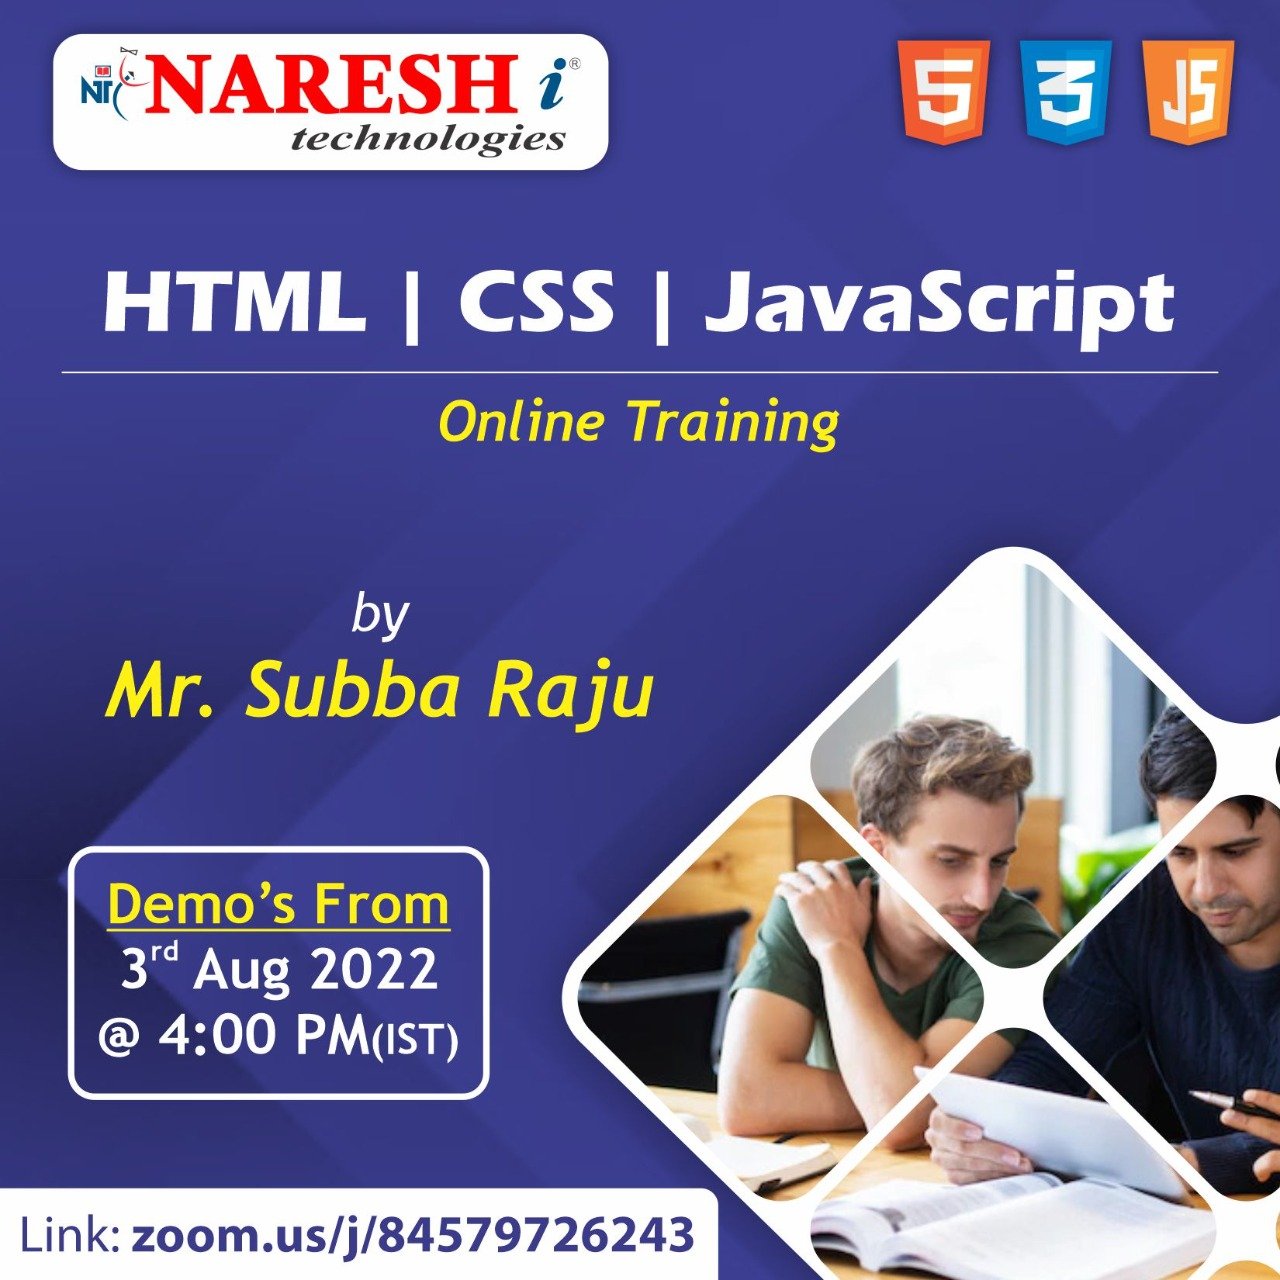 Attend Free Online Demo On HTML | CSS | JavaScript by Mr.Subba Raju, Online Event